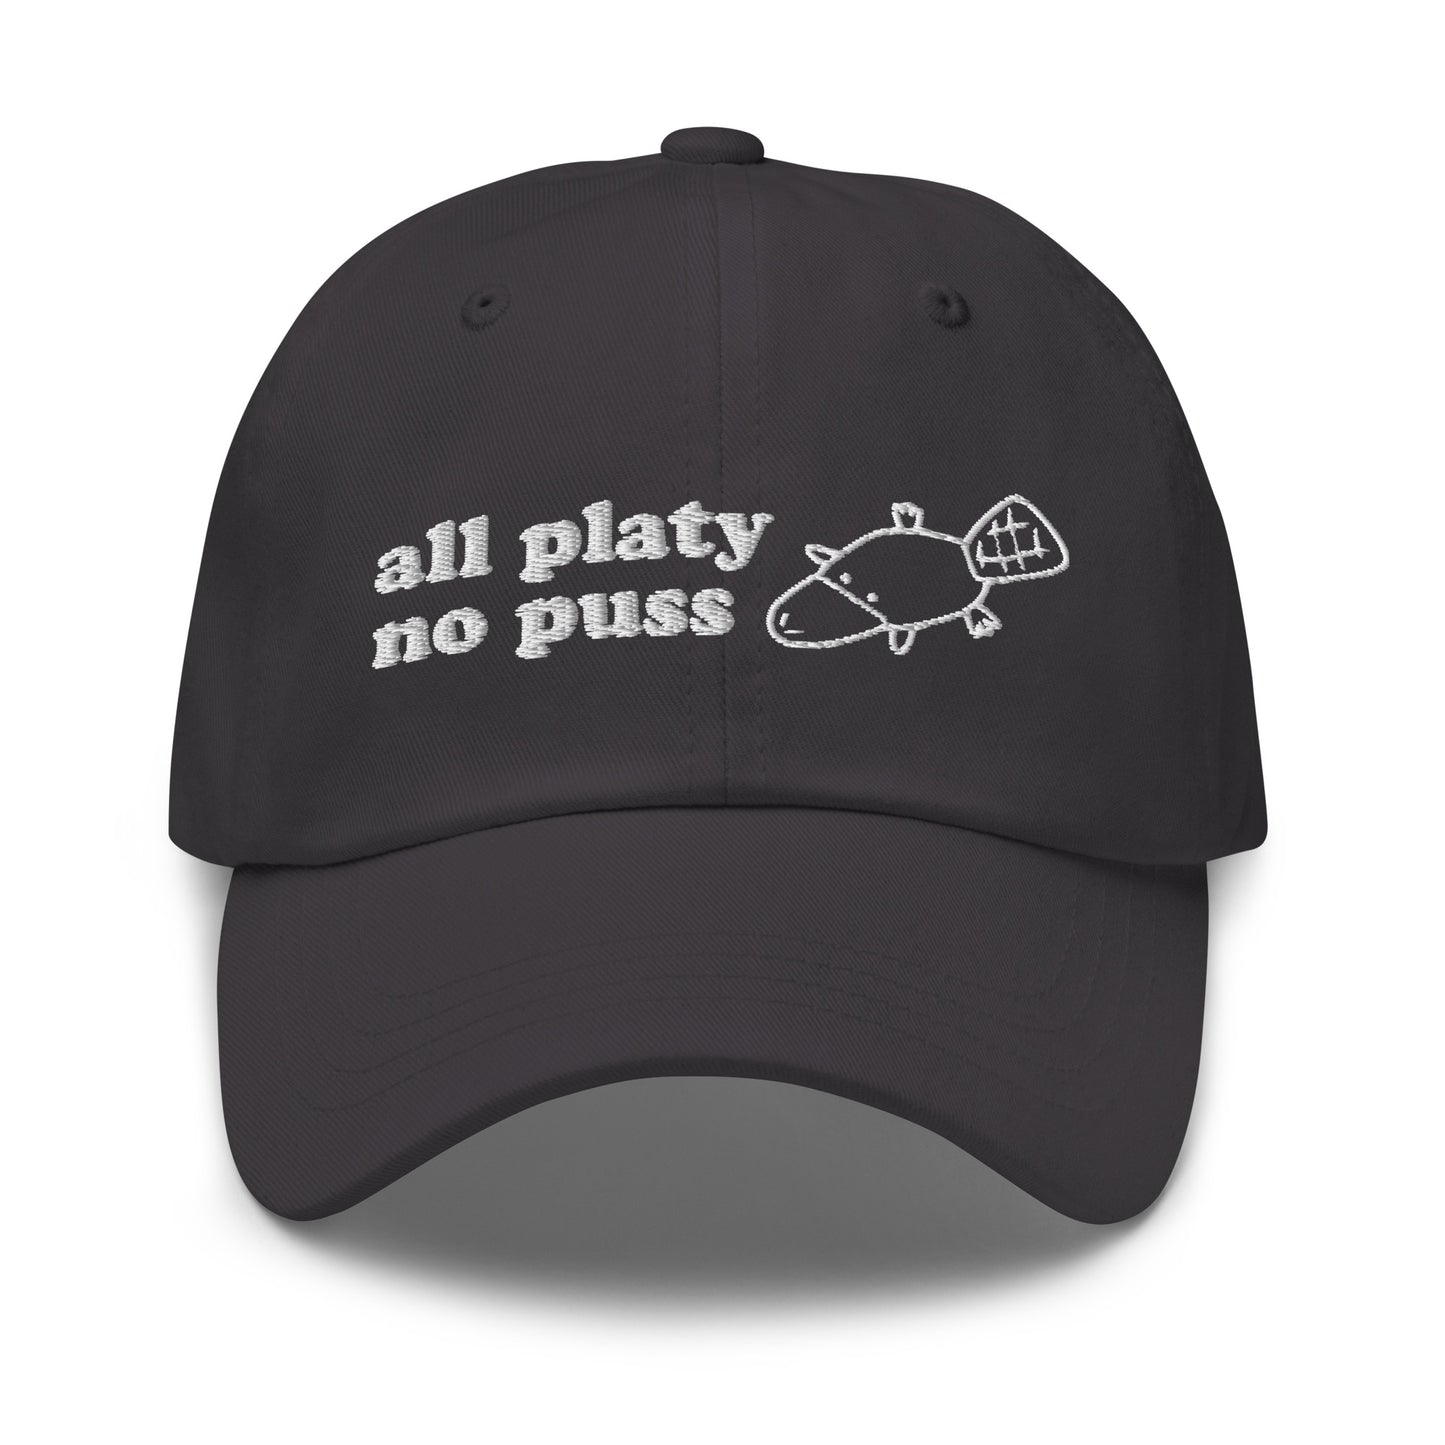 All Platy, No Puss hat